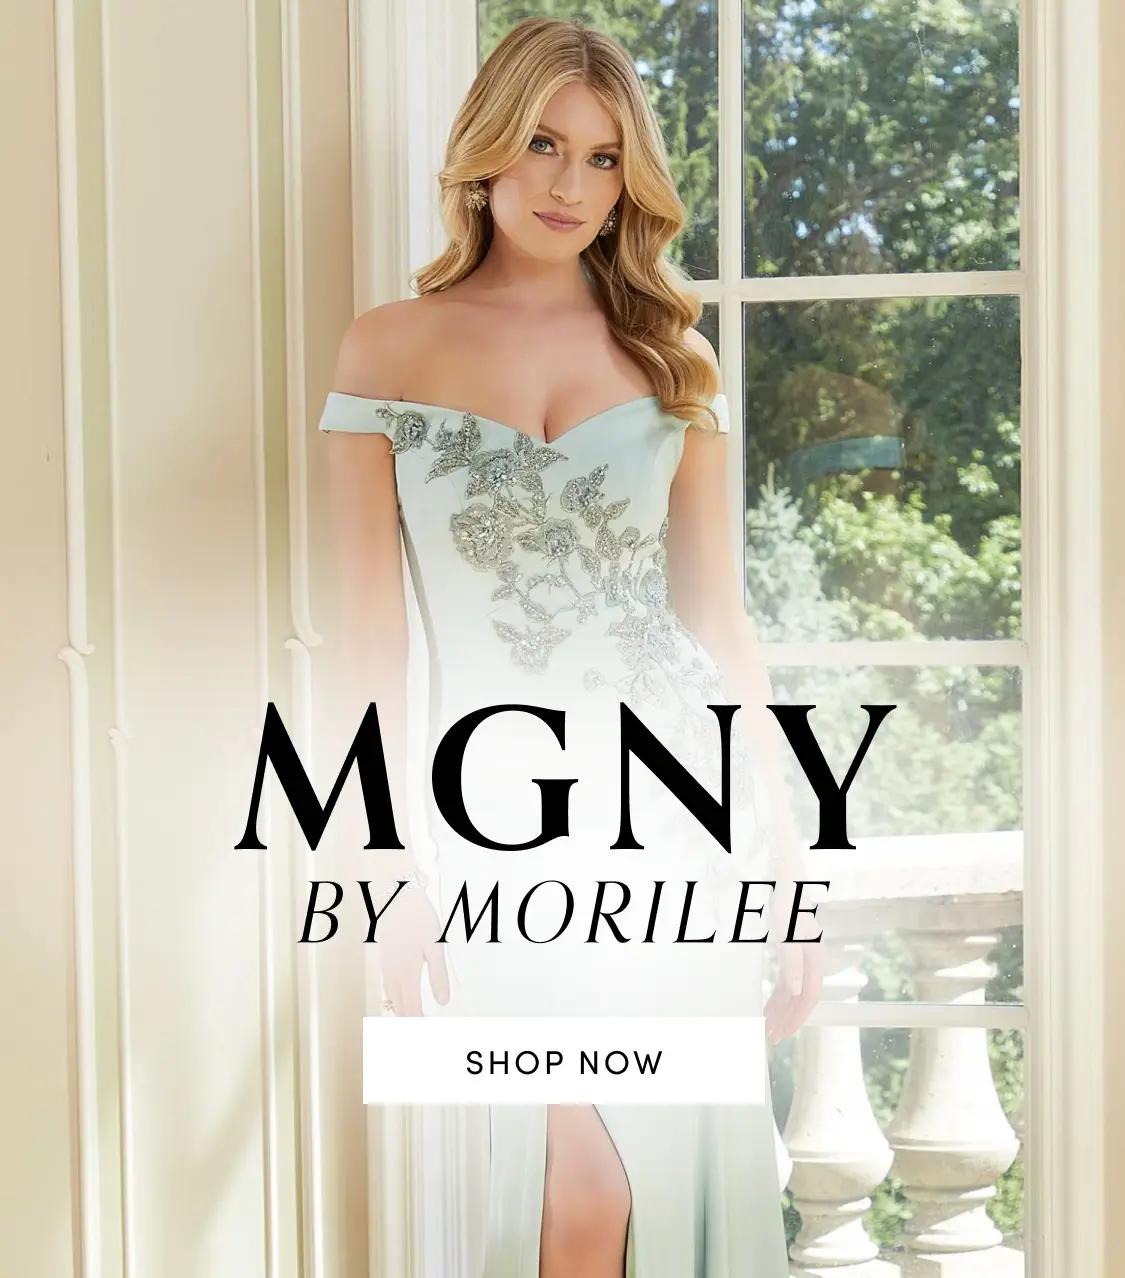 MGNY by Morilee Banner Mobile